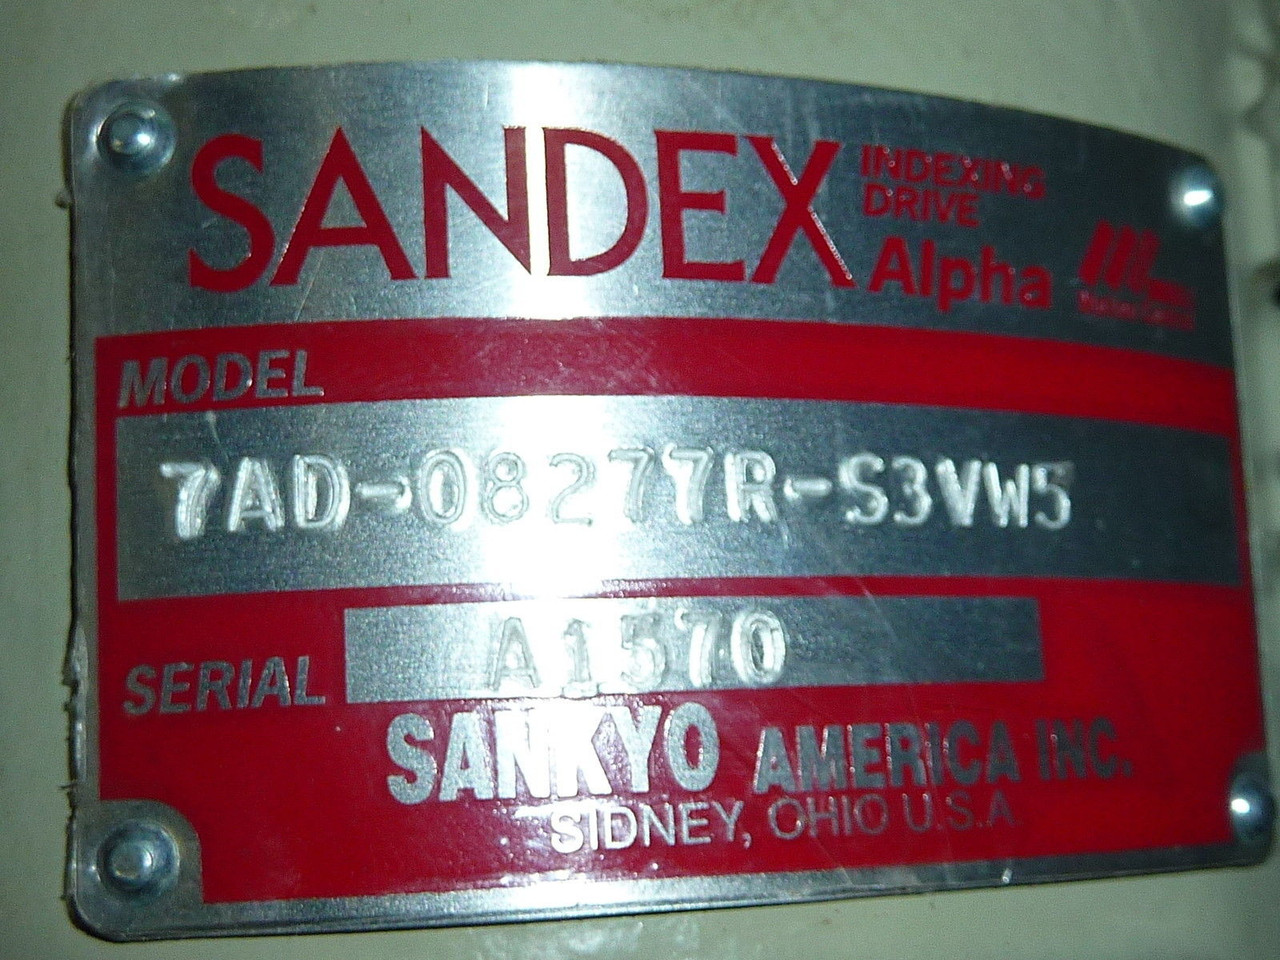 Sandex 7AD-08277R-S3VW5 Indexing Drive USED